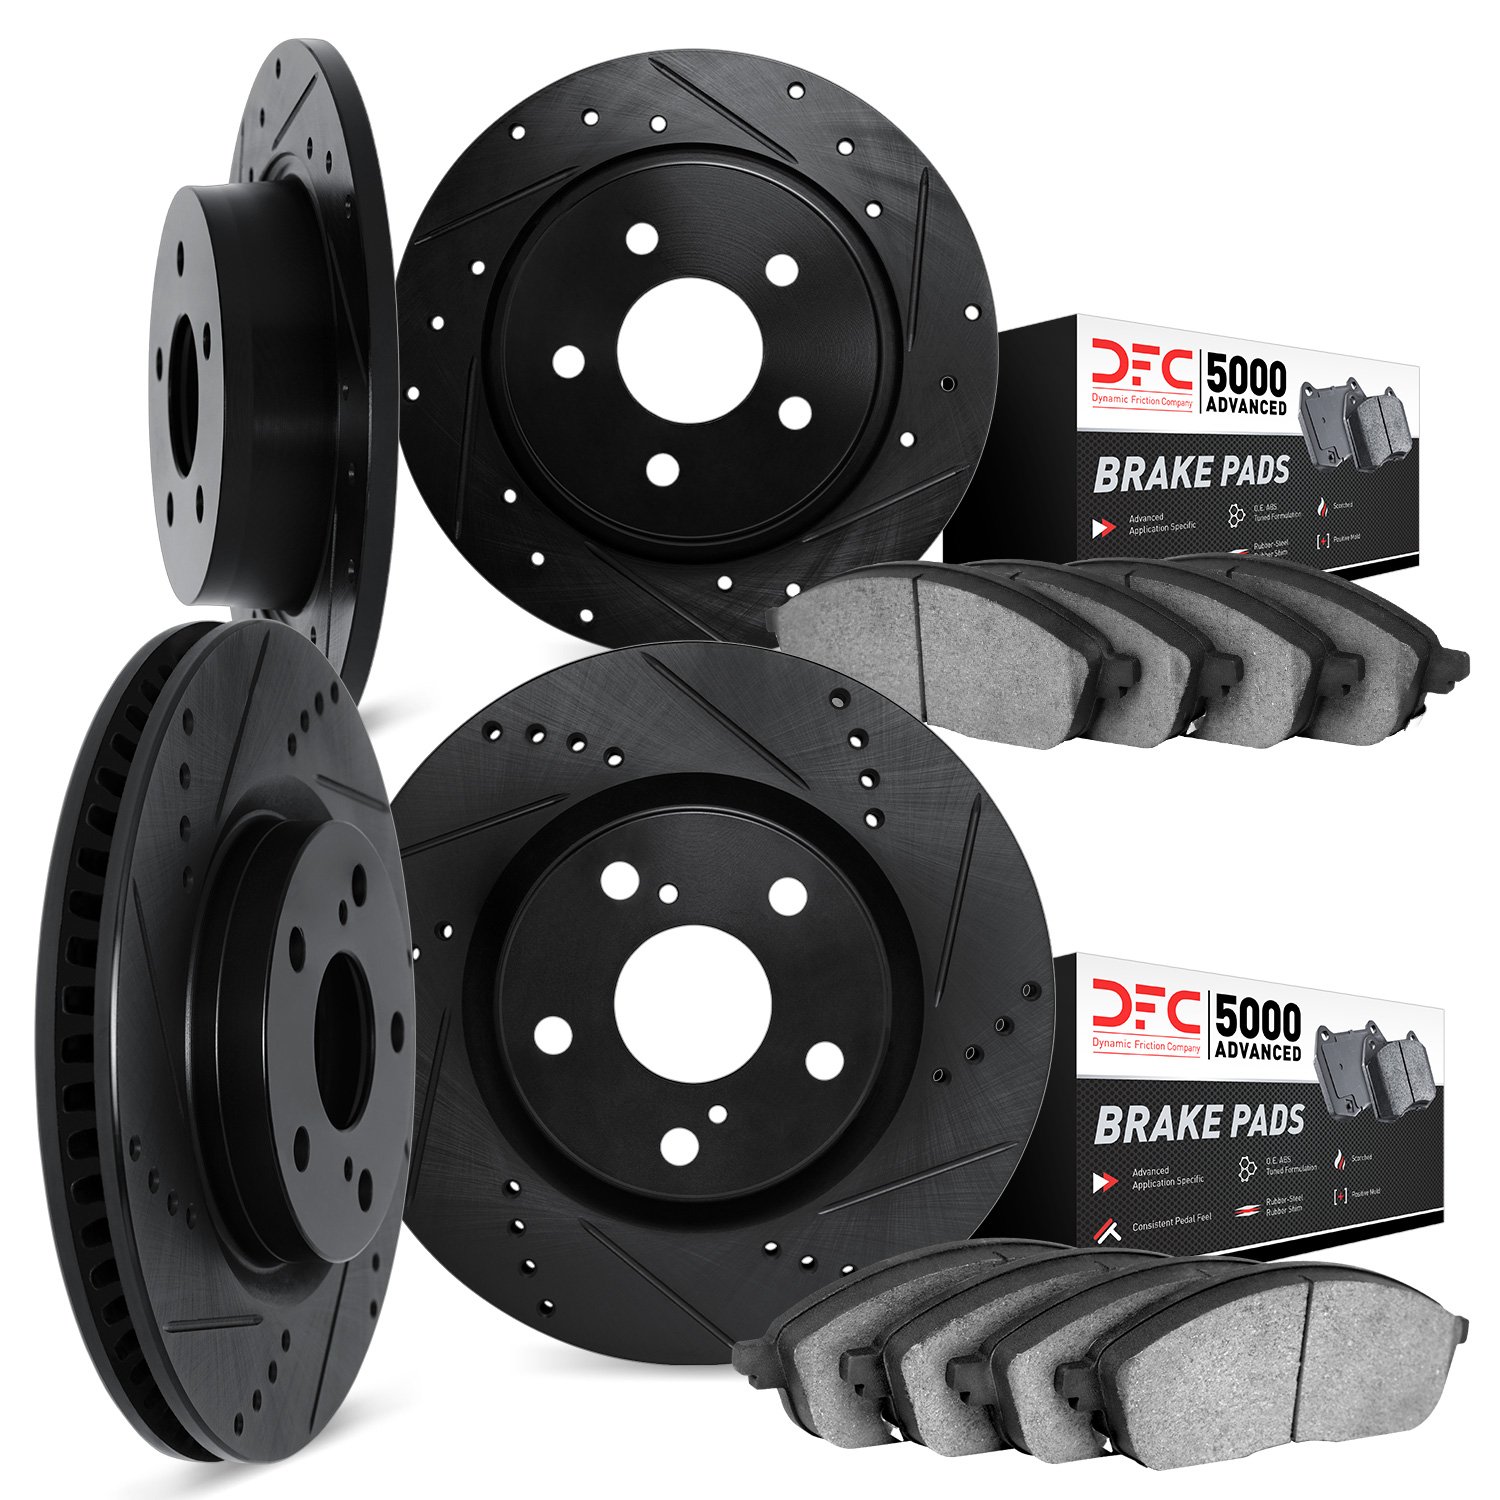 8504-58008 Drilled/Slotted Brake Rotors w/5000 Advanced Brake Pads Kit [Black], 2017-2020 Acura/Honda, Position: Front and Rear